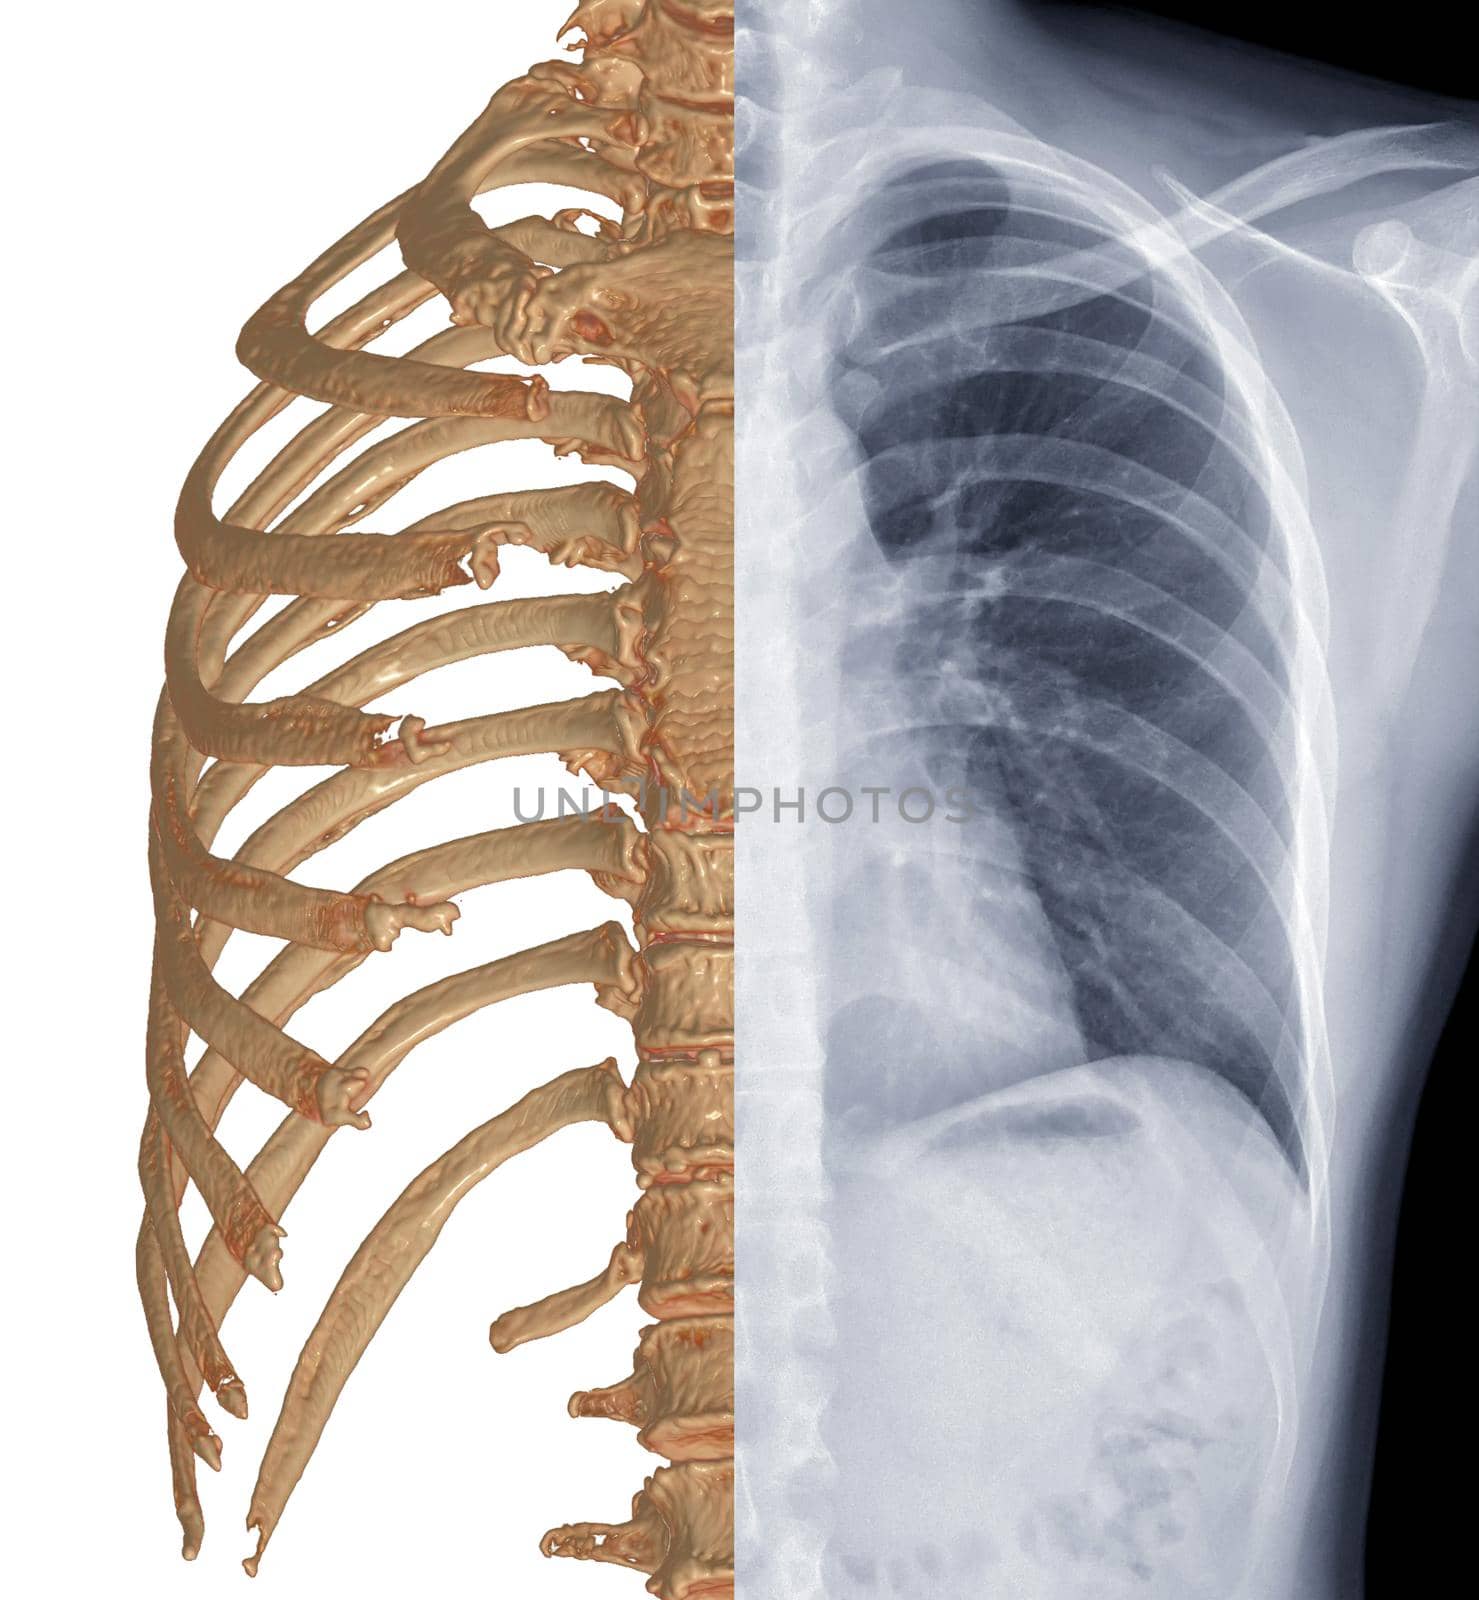 Compare CT Chest 3D rendering and Chest x-ray .